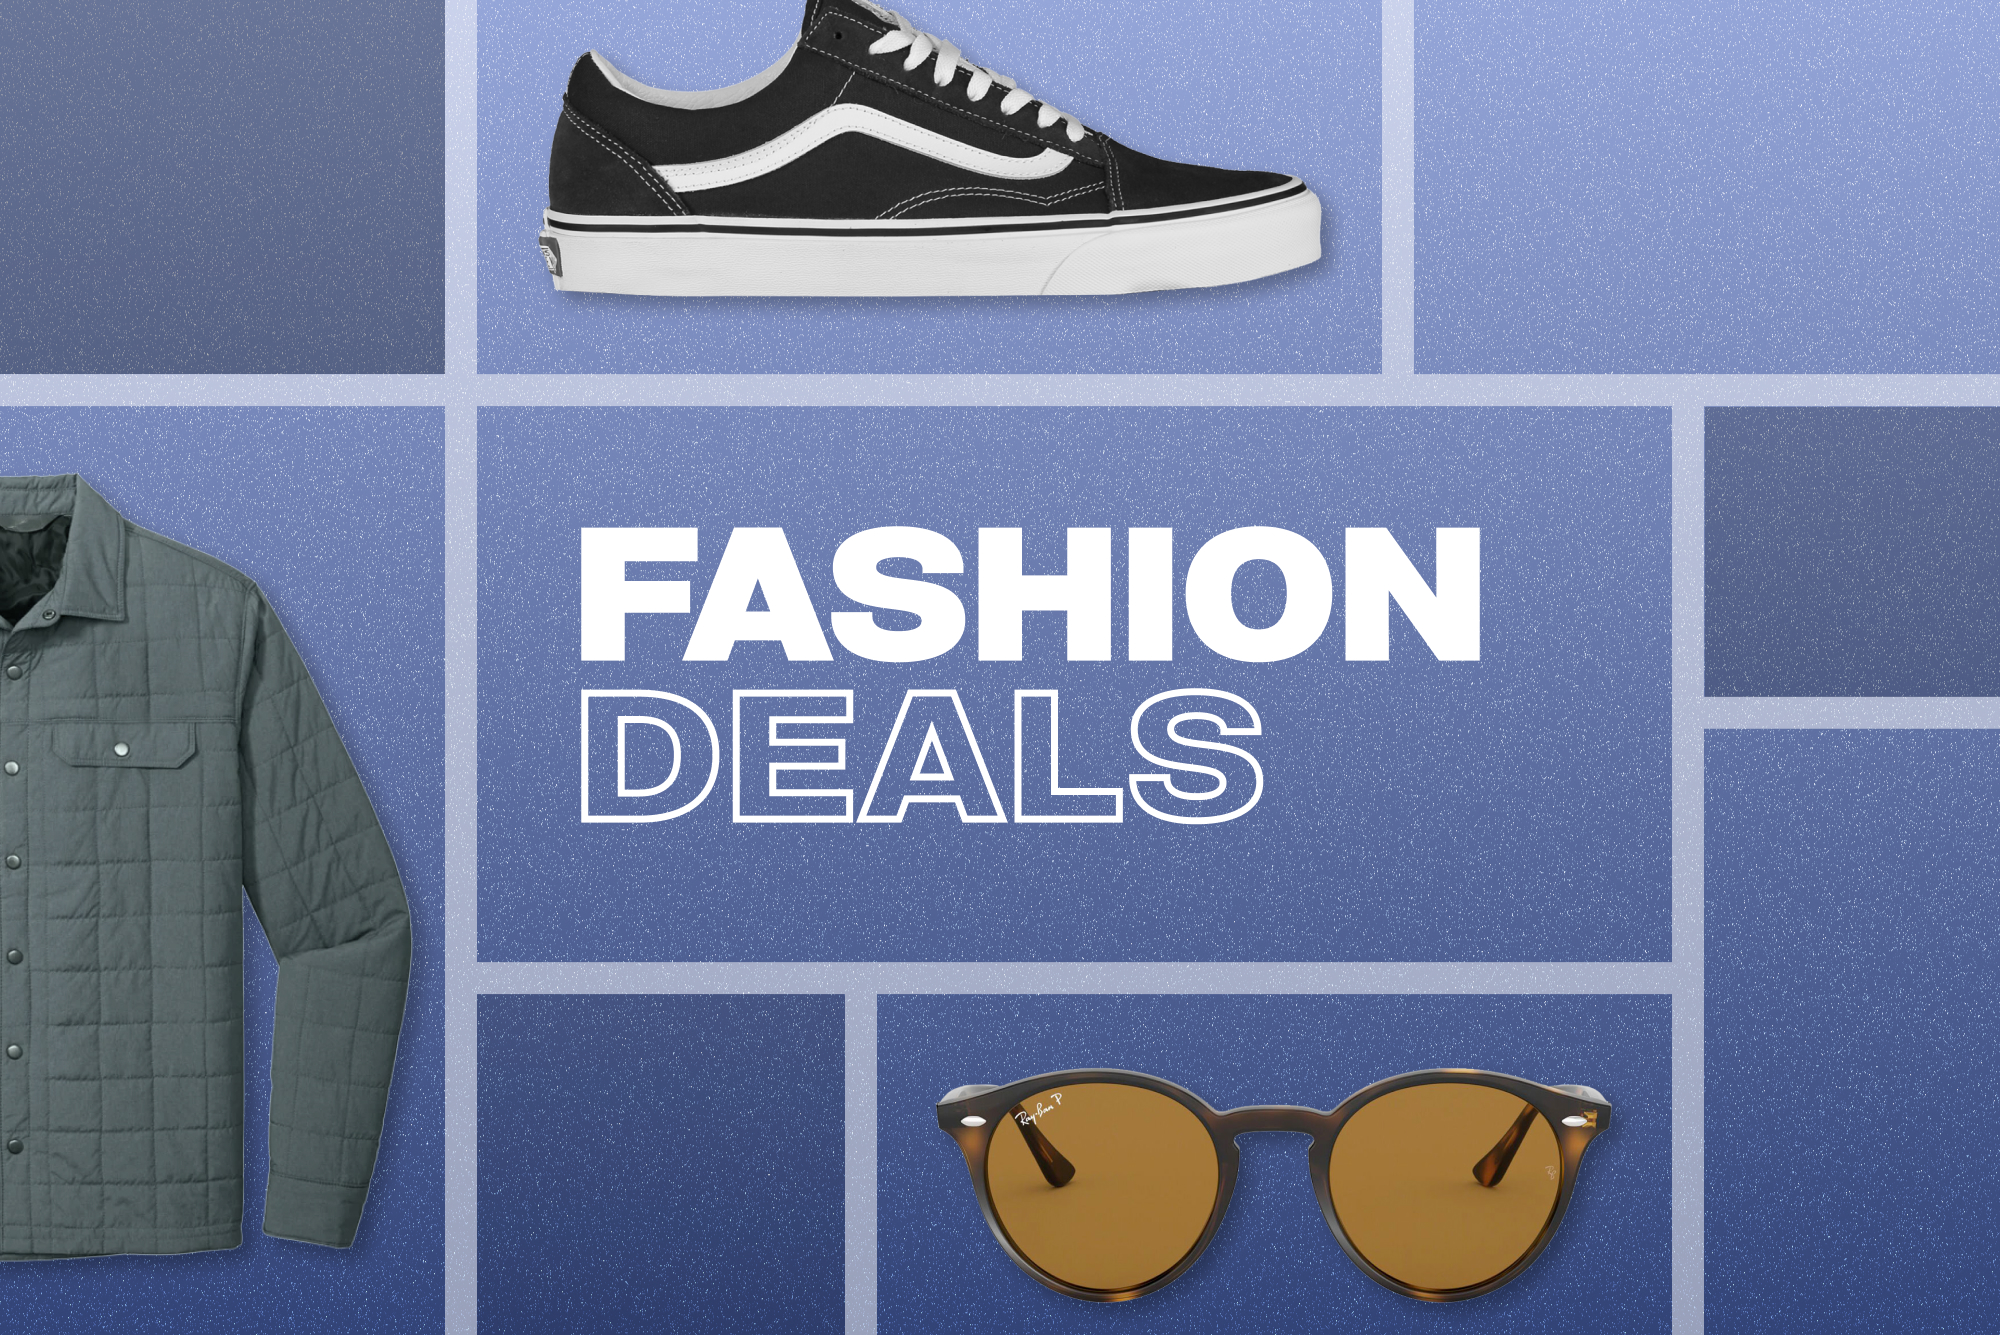 Prime Day Fashion Deals for 2021 - The Manual